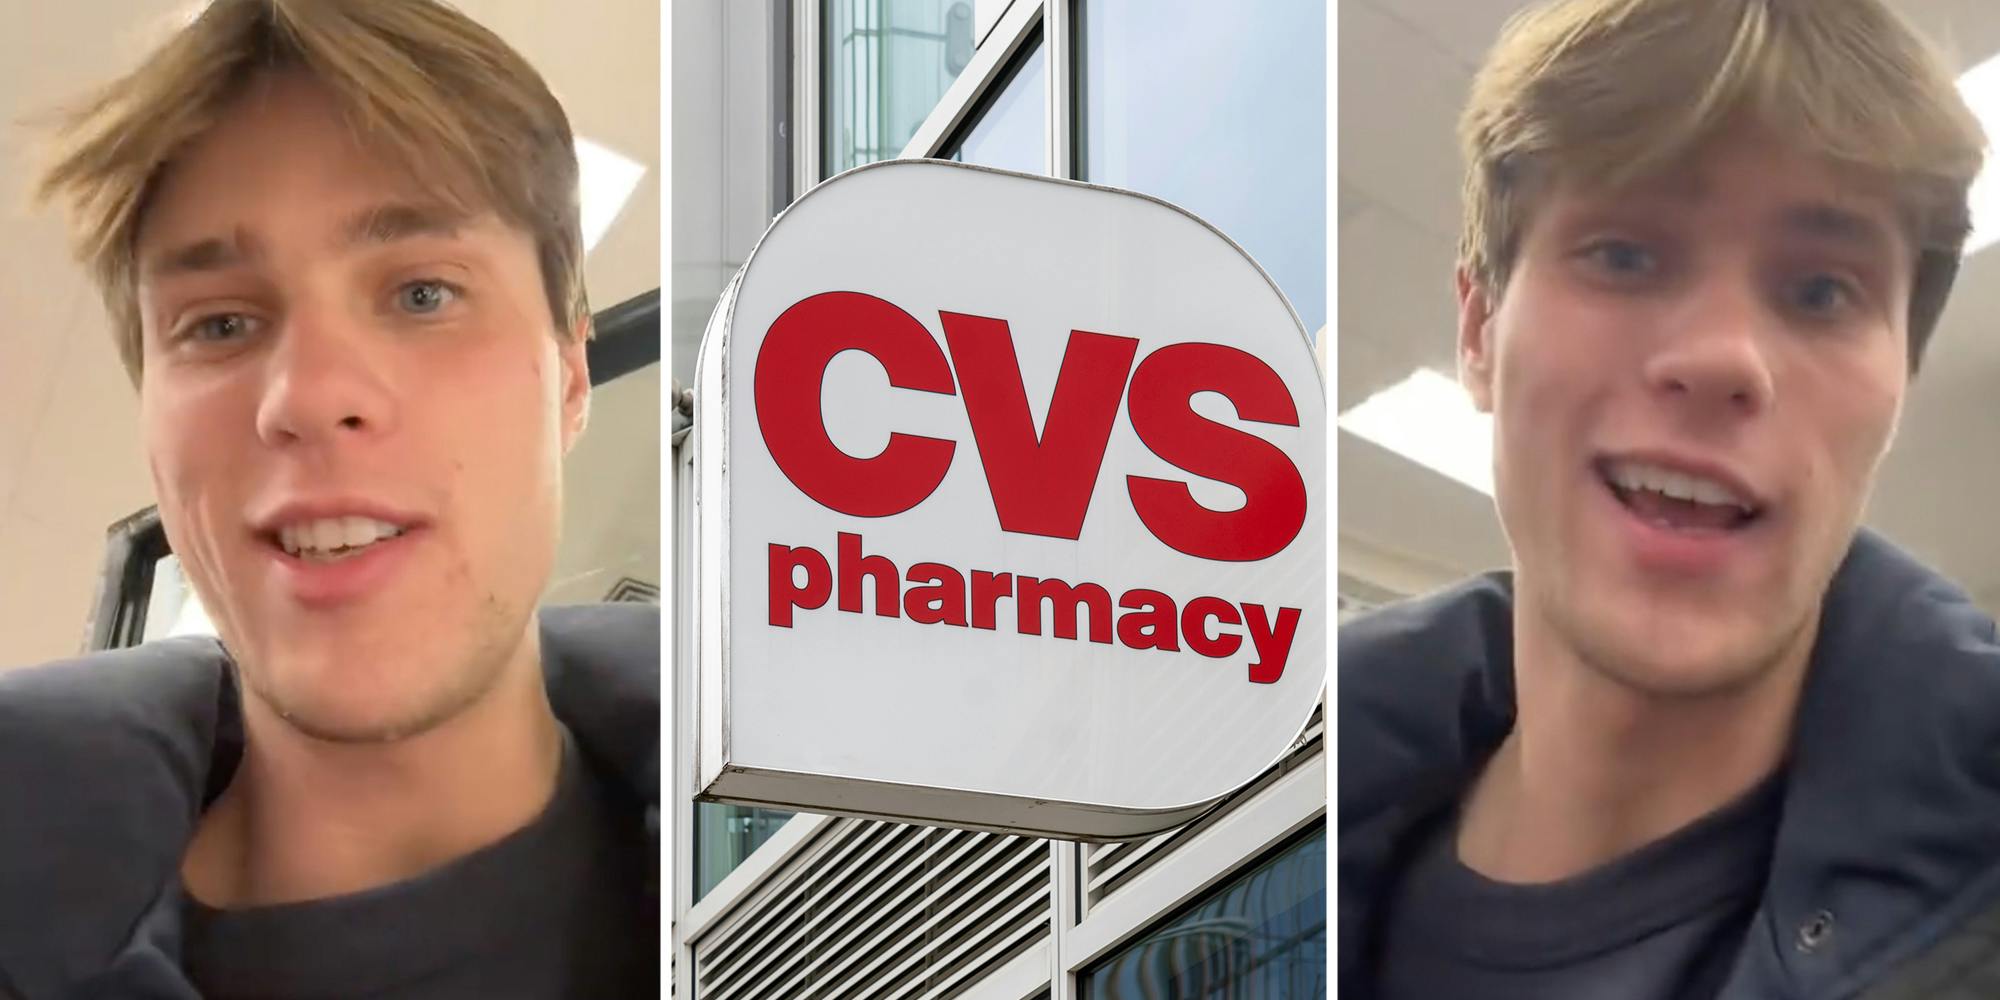 ‘CVS is brilliant almost free labor!!’: Man shares how to make money while shopping at CVS. Viewers think it’s the store’s way of not having to pay workers